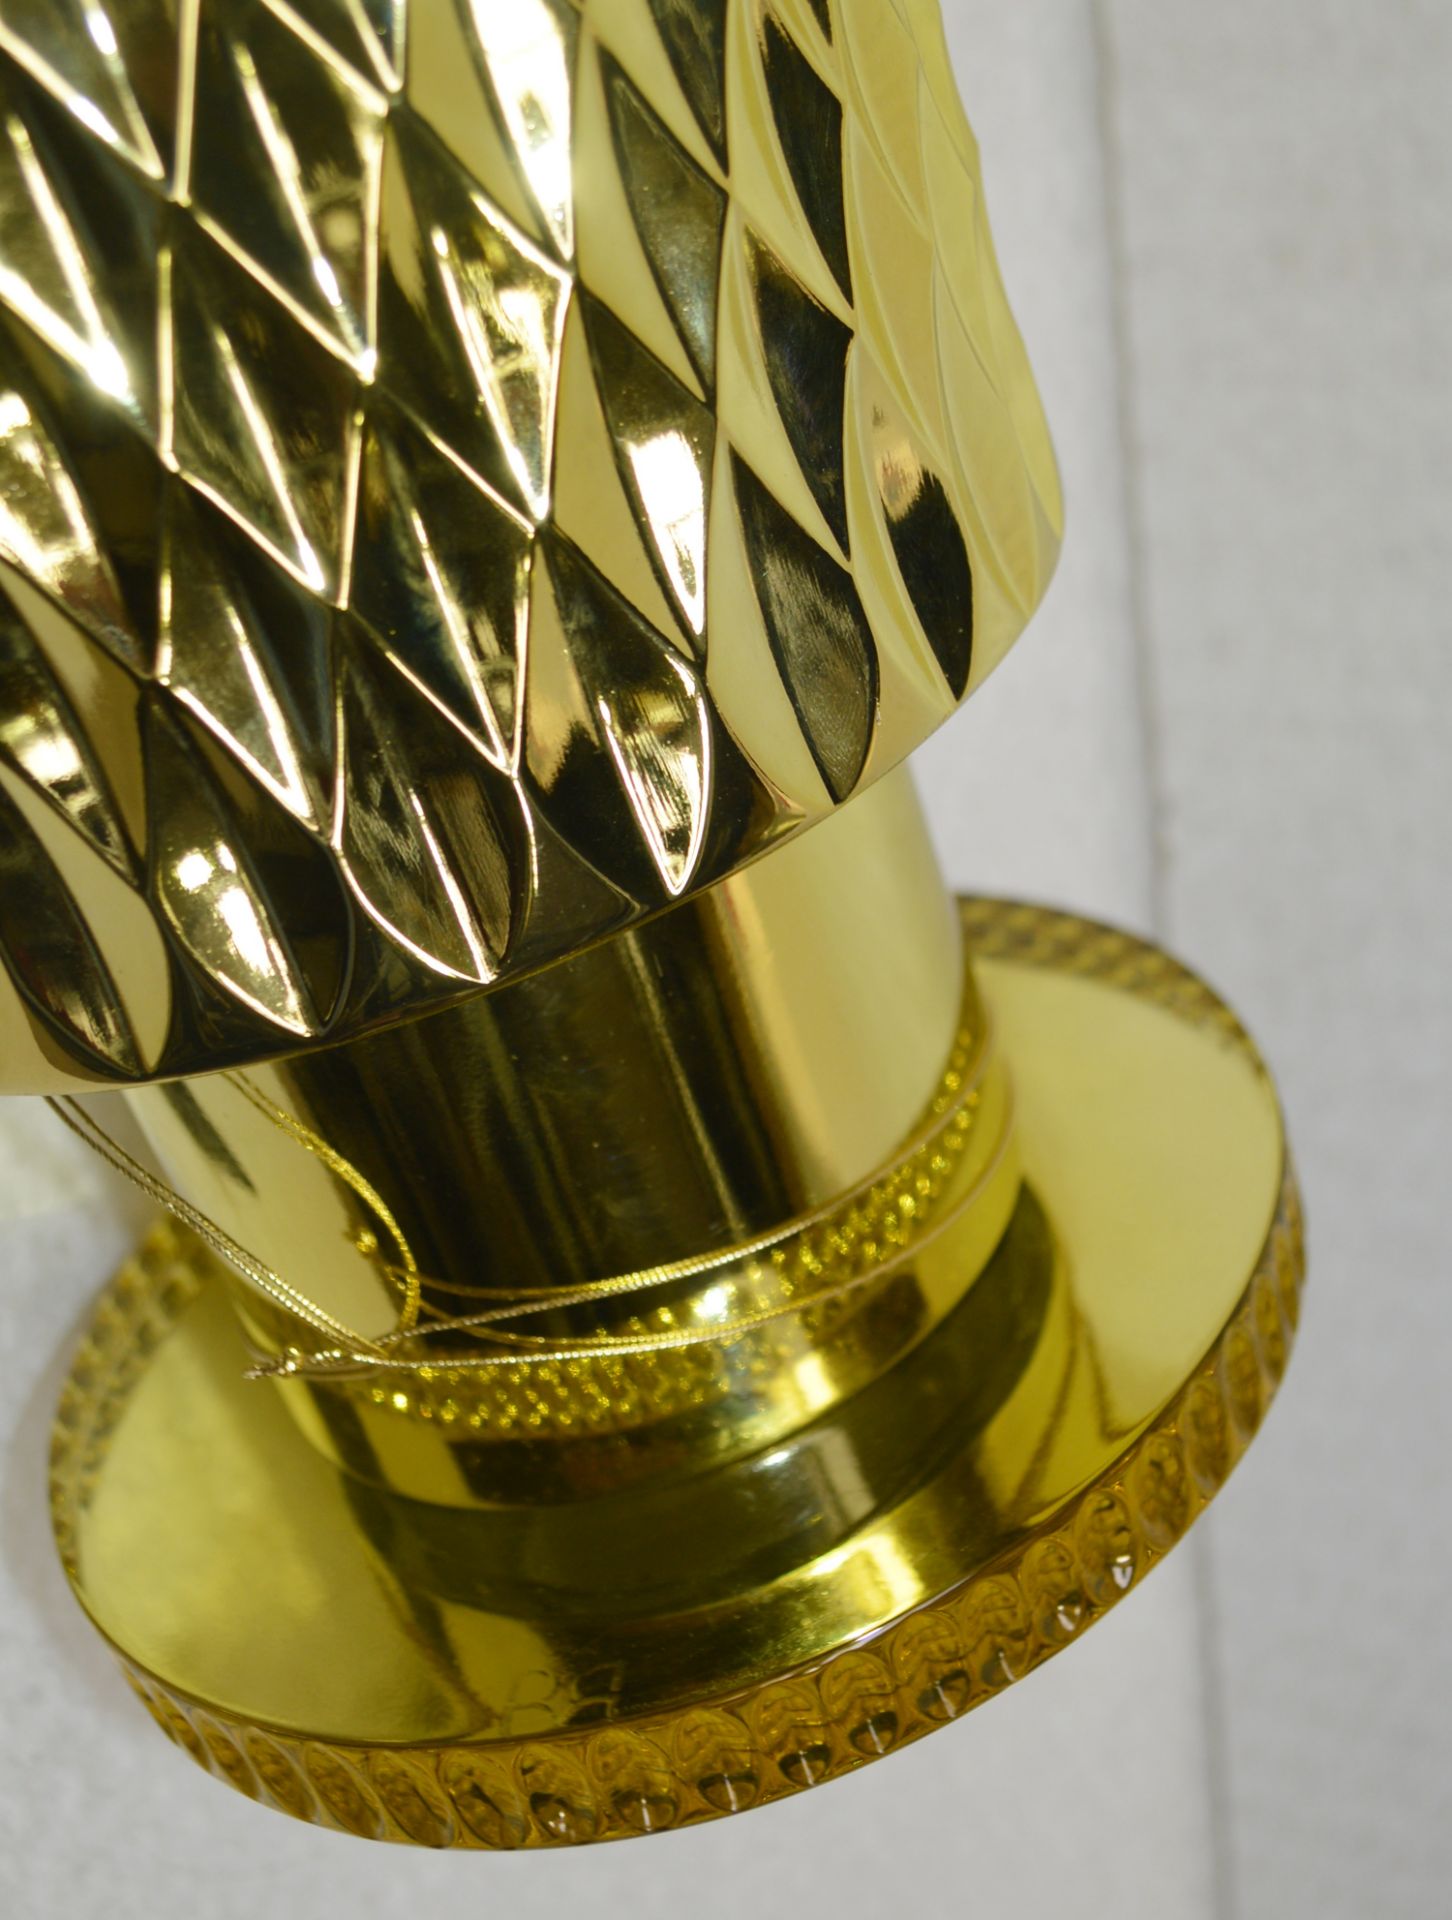 1 x BALDI 'Home Jewels' Italian Hand-crafted Artisan Crystal Vase With A Graduated Gold Tint - Image 3 of 6